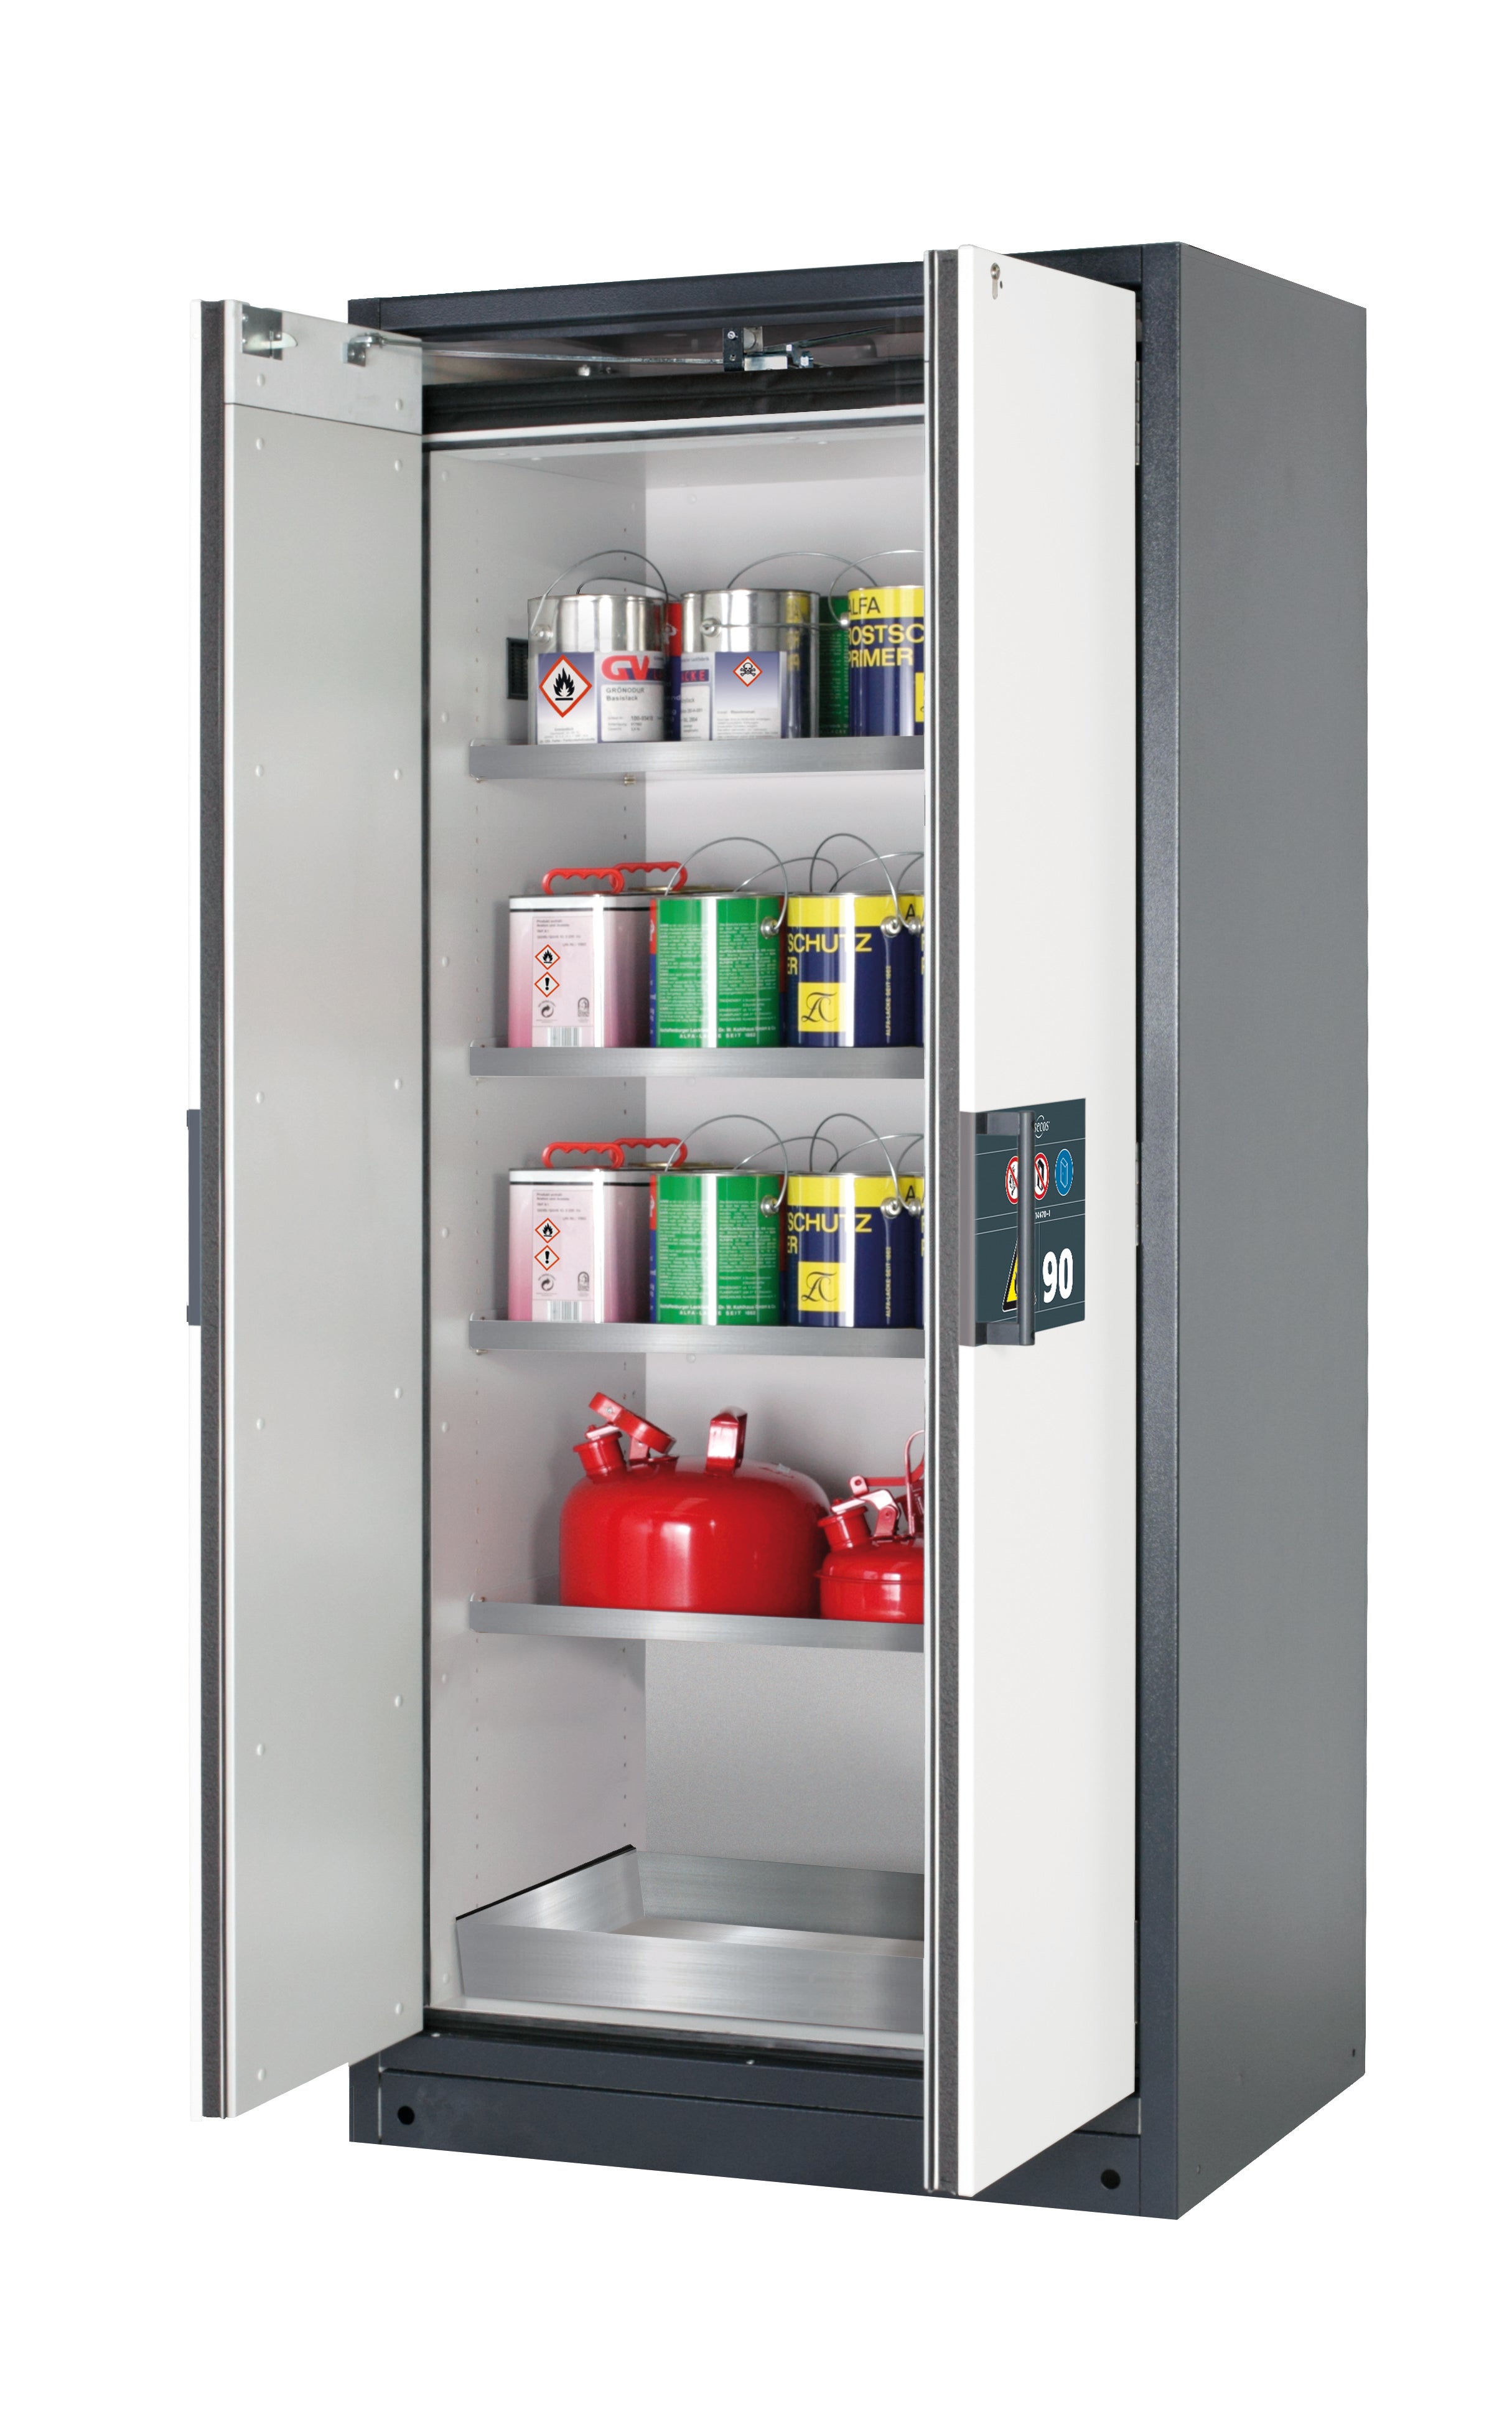 Type 90 safety storage cabinet Q-PEGASUS-90 model Q90.195.090.WDAC in pure white RAL 9010 with 4x shelf standard (stainless steel 1.4301),